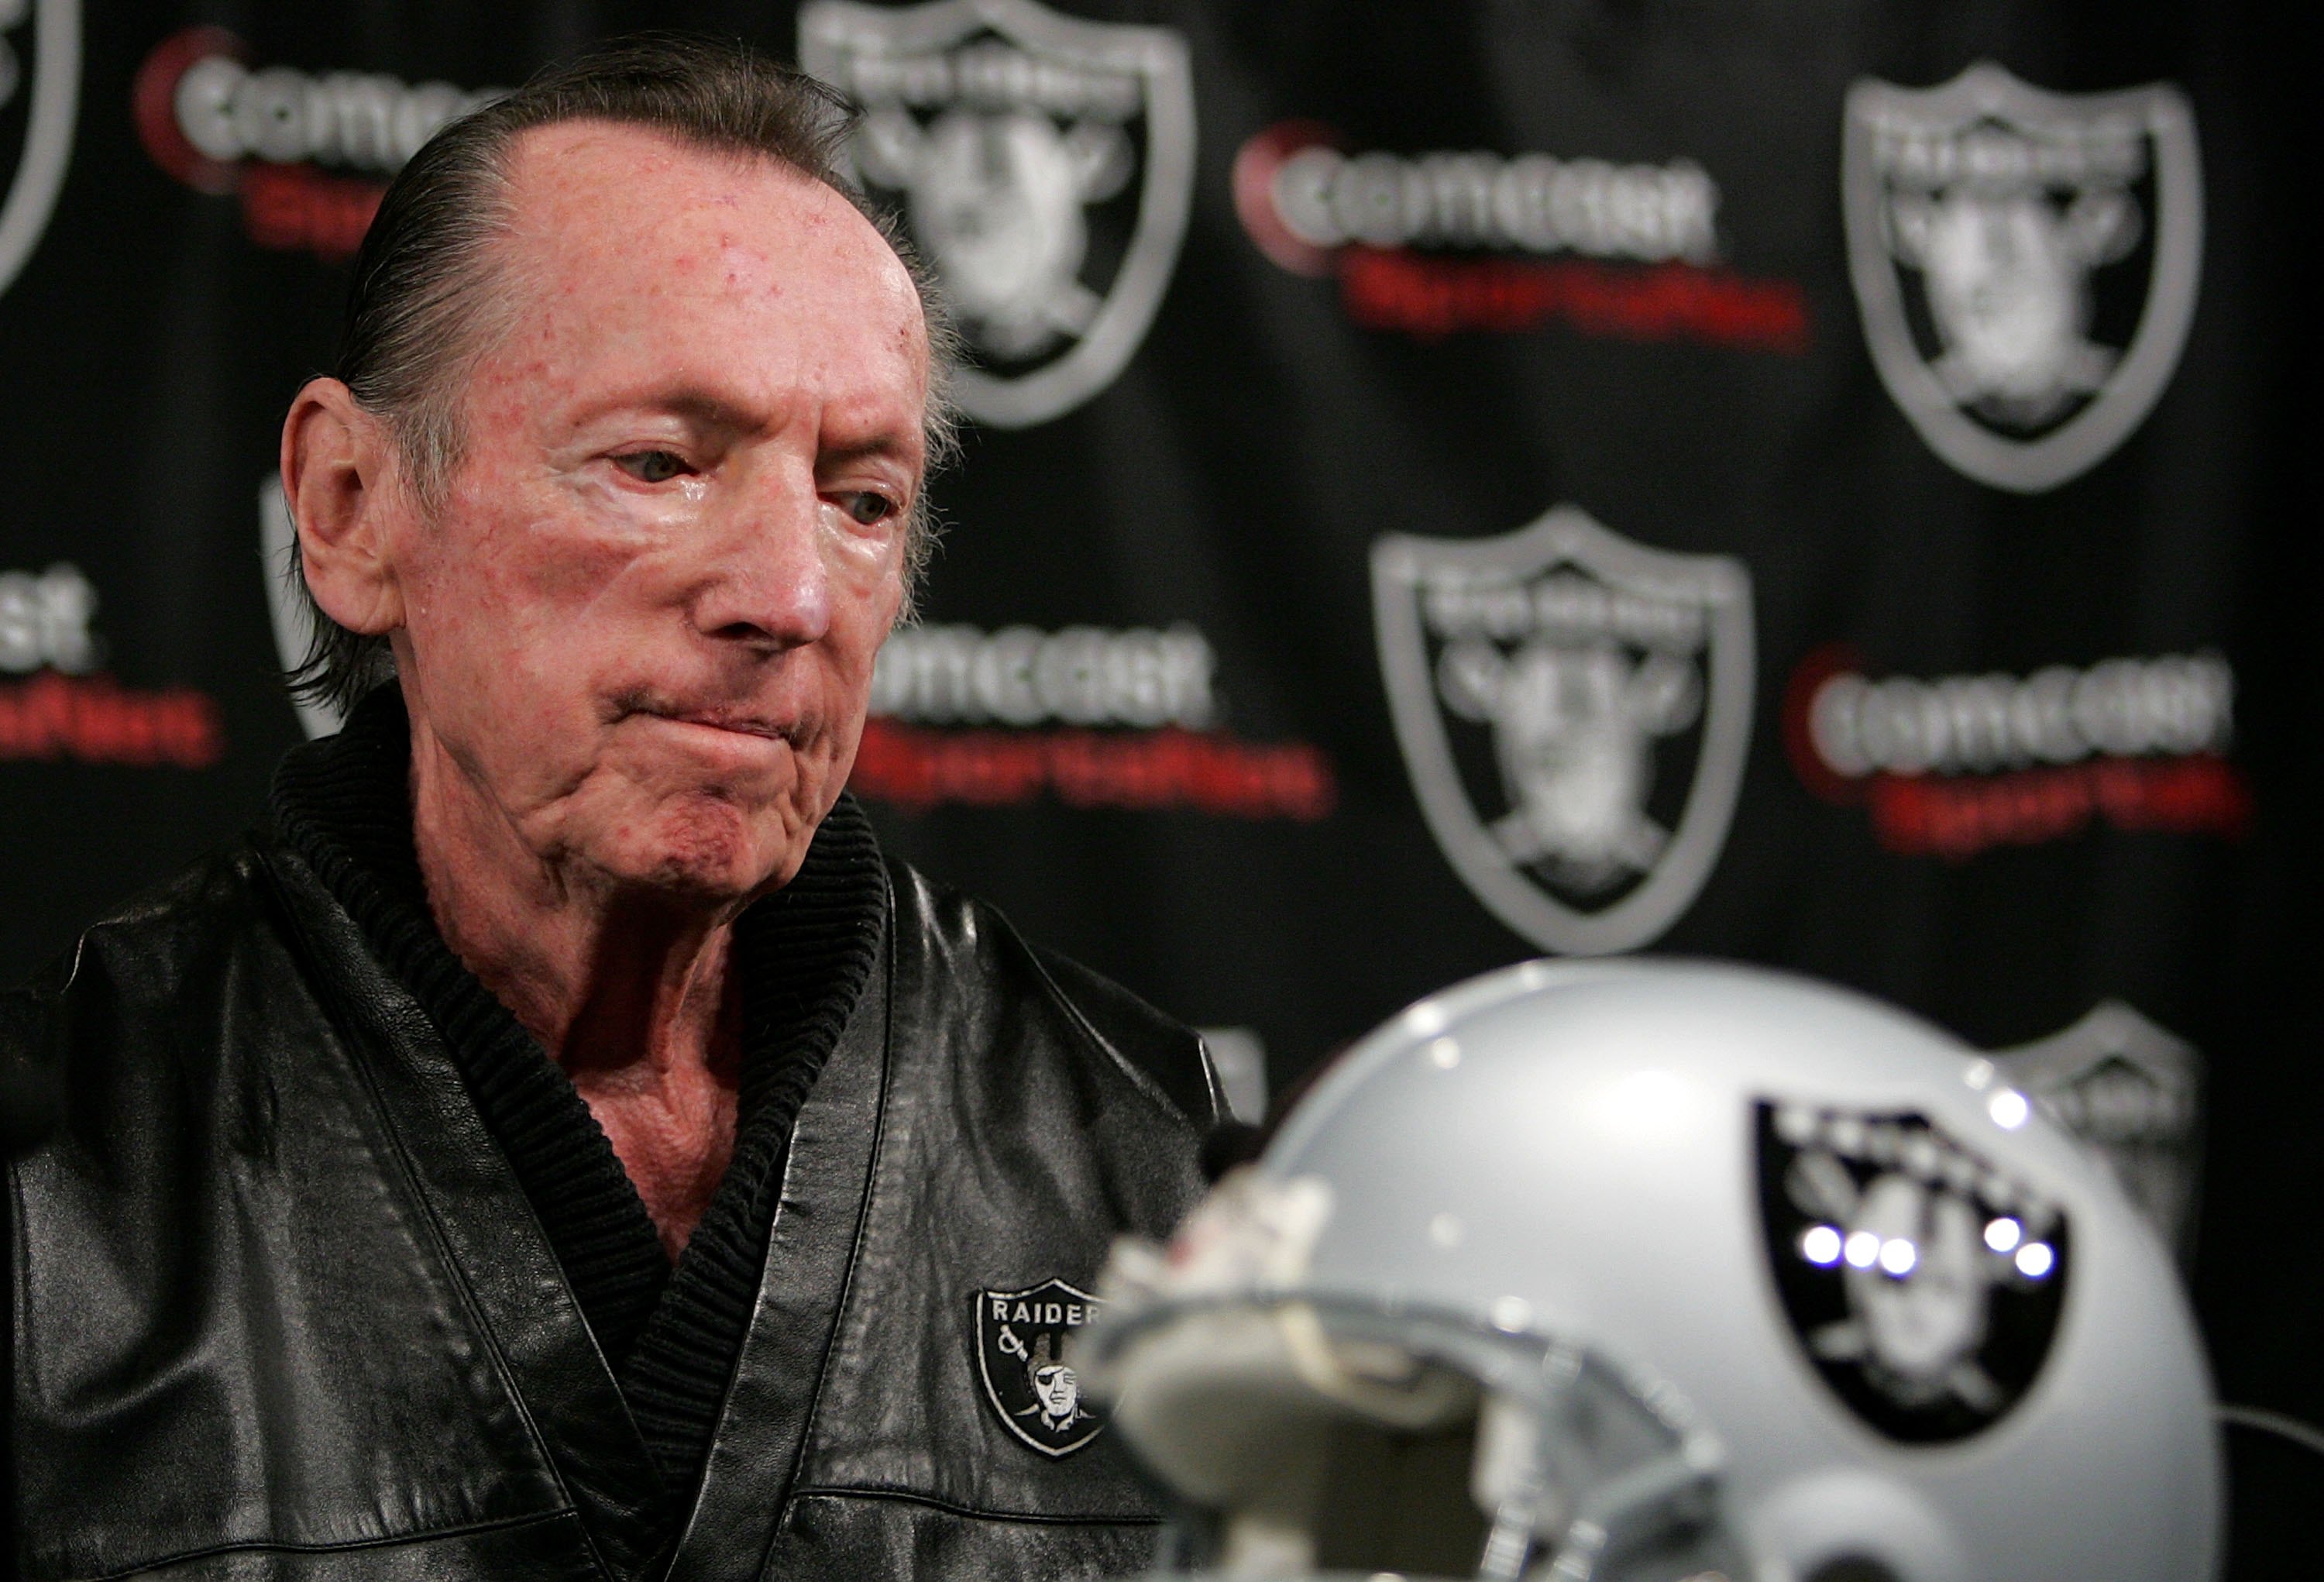 Oakland Raiders owner Al Davis speaks during a news conferenceon January 23...